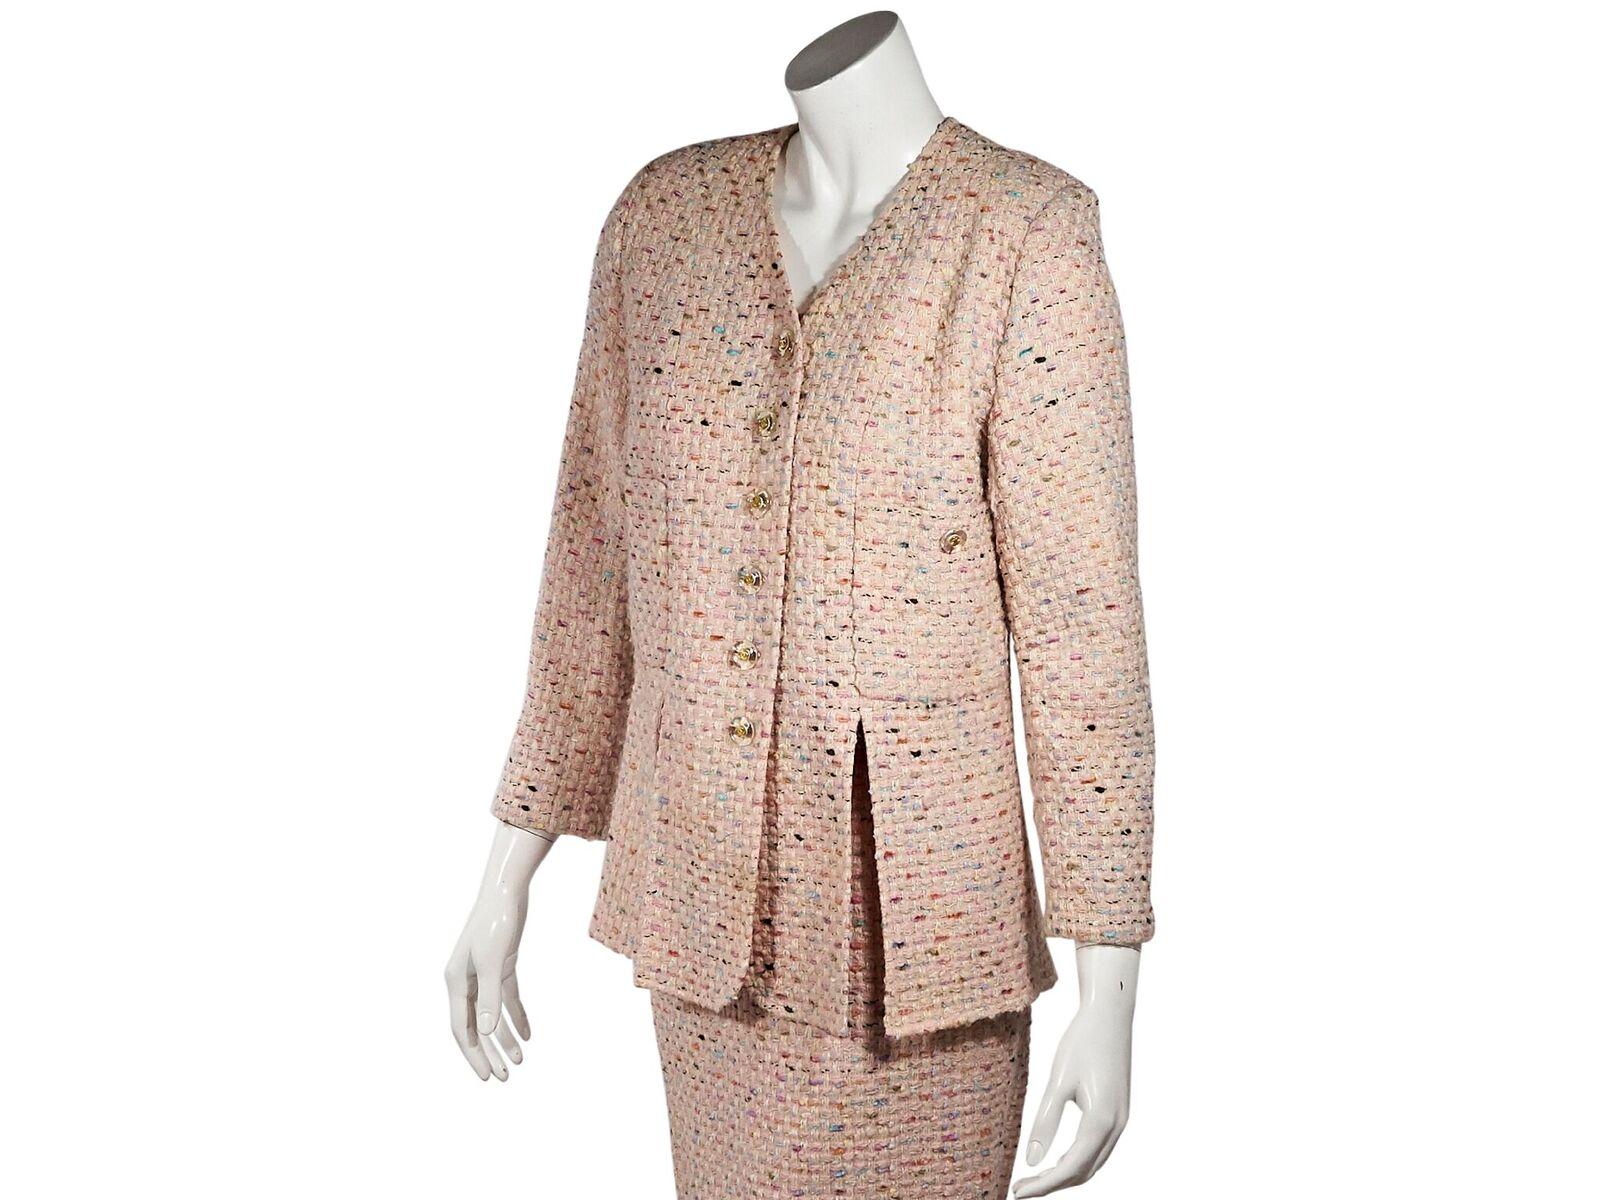 Product details:  Multicolor tweed skirt suit set by Chanel.  V-neck.  Long sleeves.  Button-front closure.  Chest button patch pockets.  Vented hem.  Matching pencil skirt.  Concealed back zip closure.  Goldtone hardware.  Jacket:  36